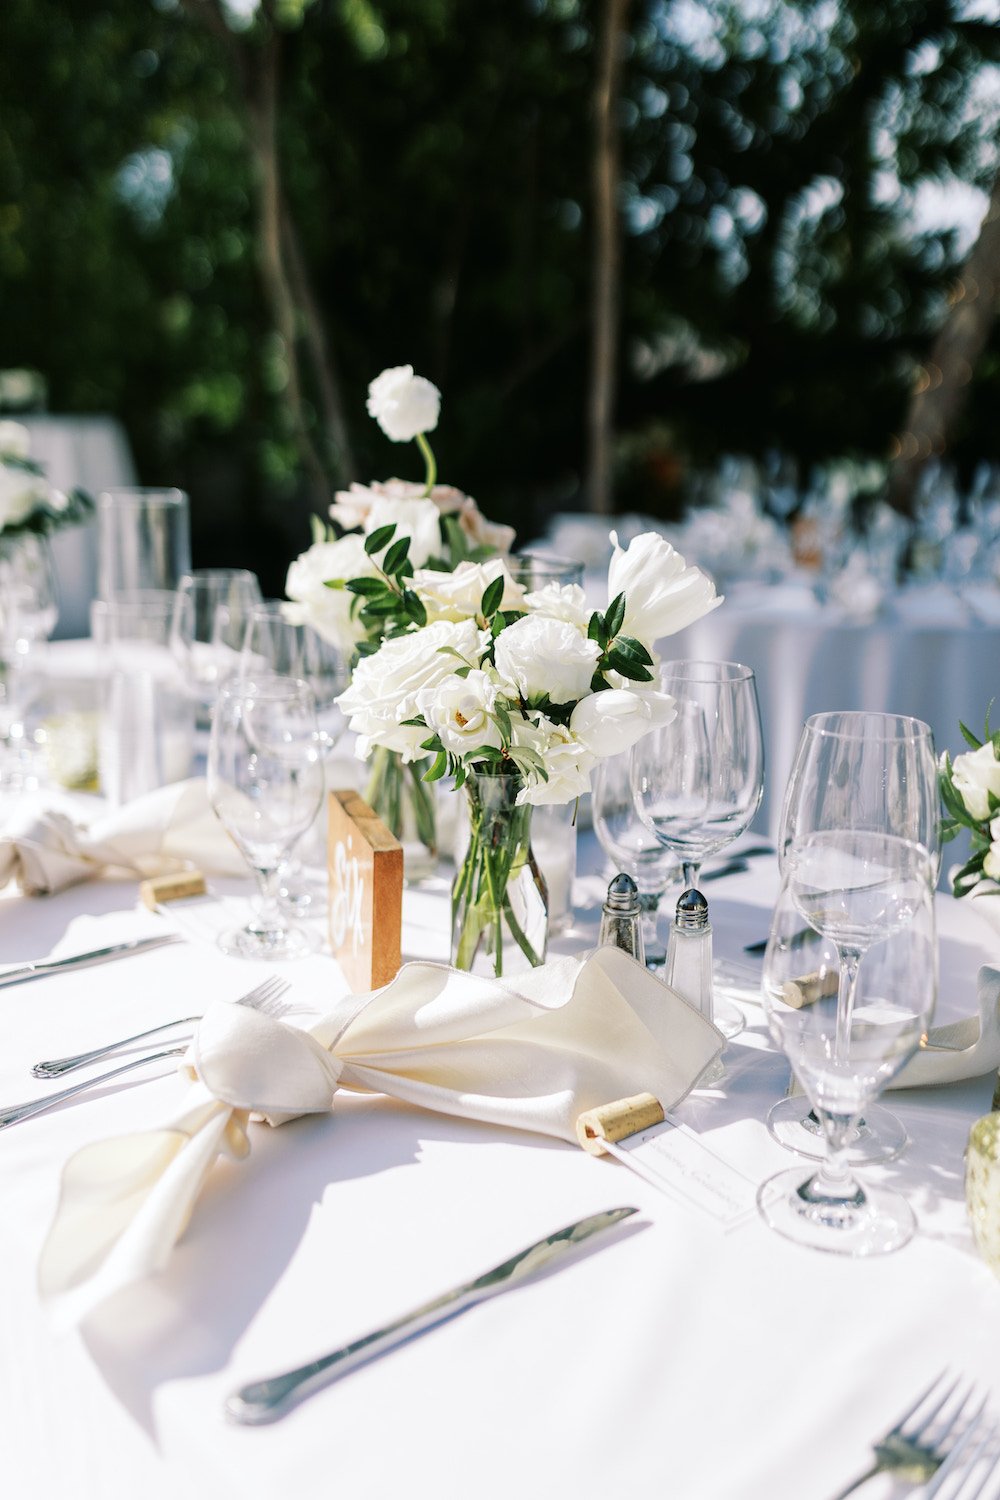 White wedding reception table details and centerpieces.